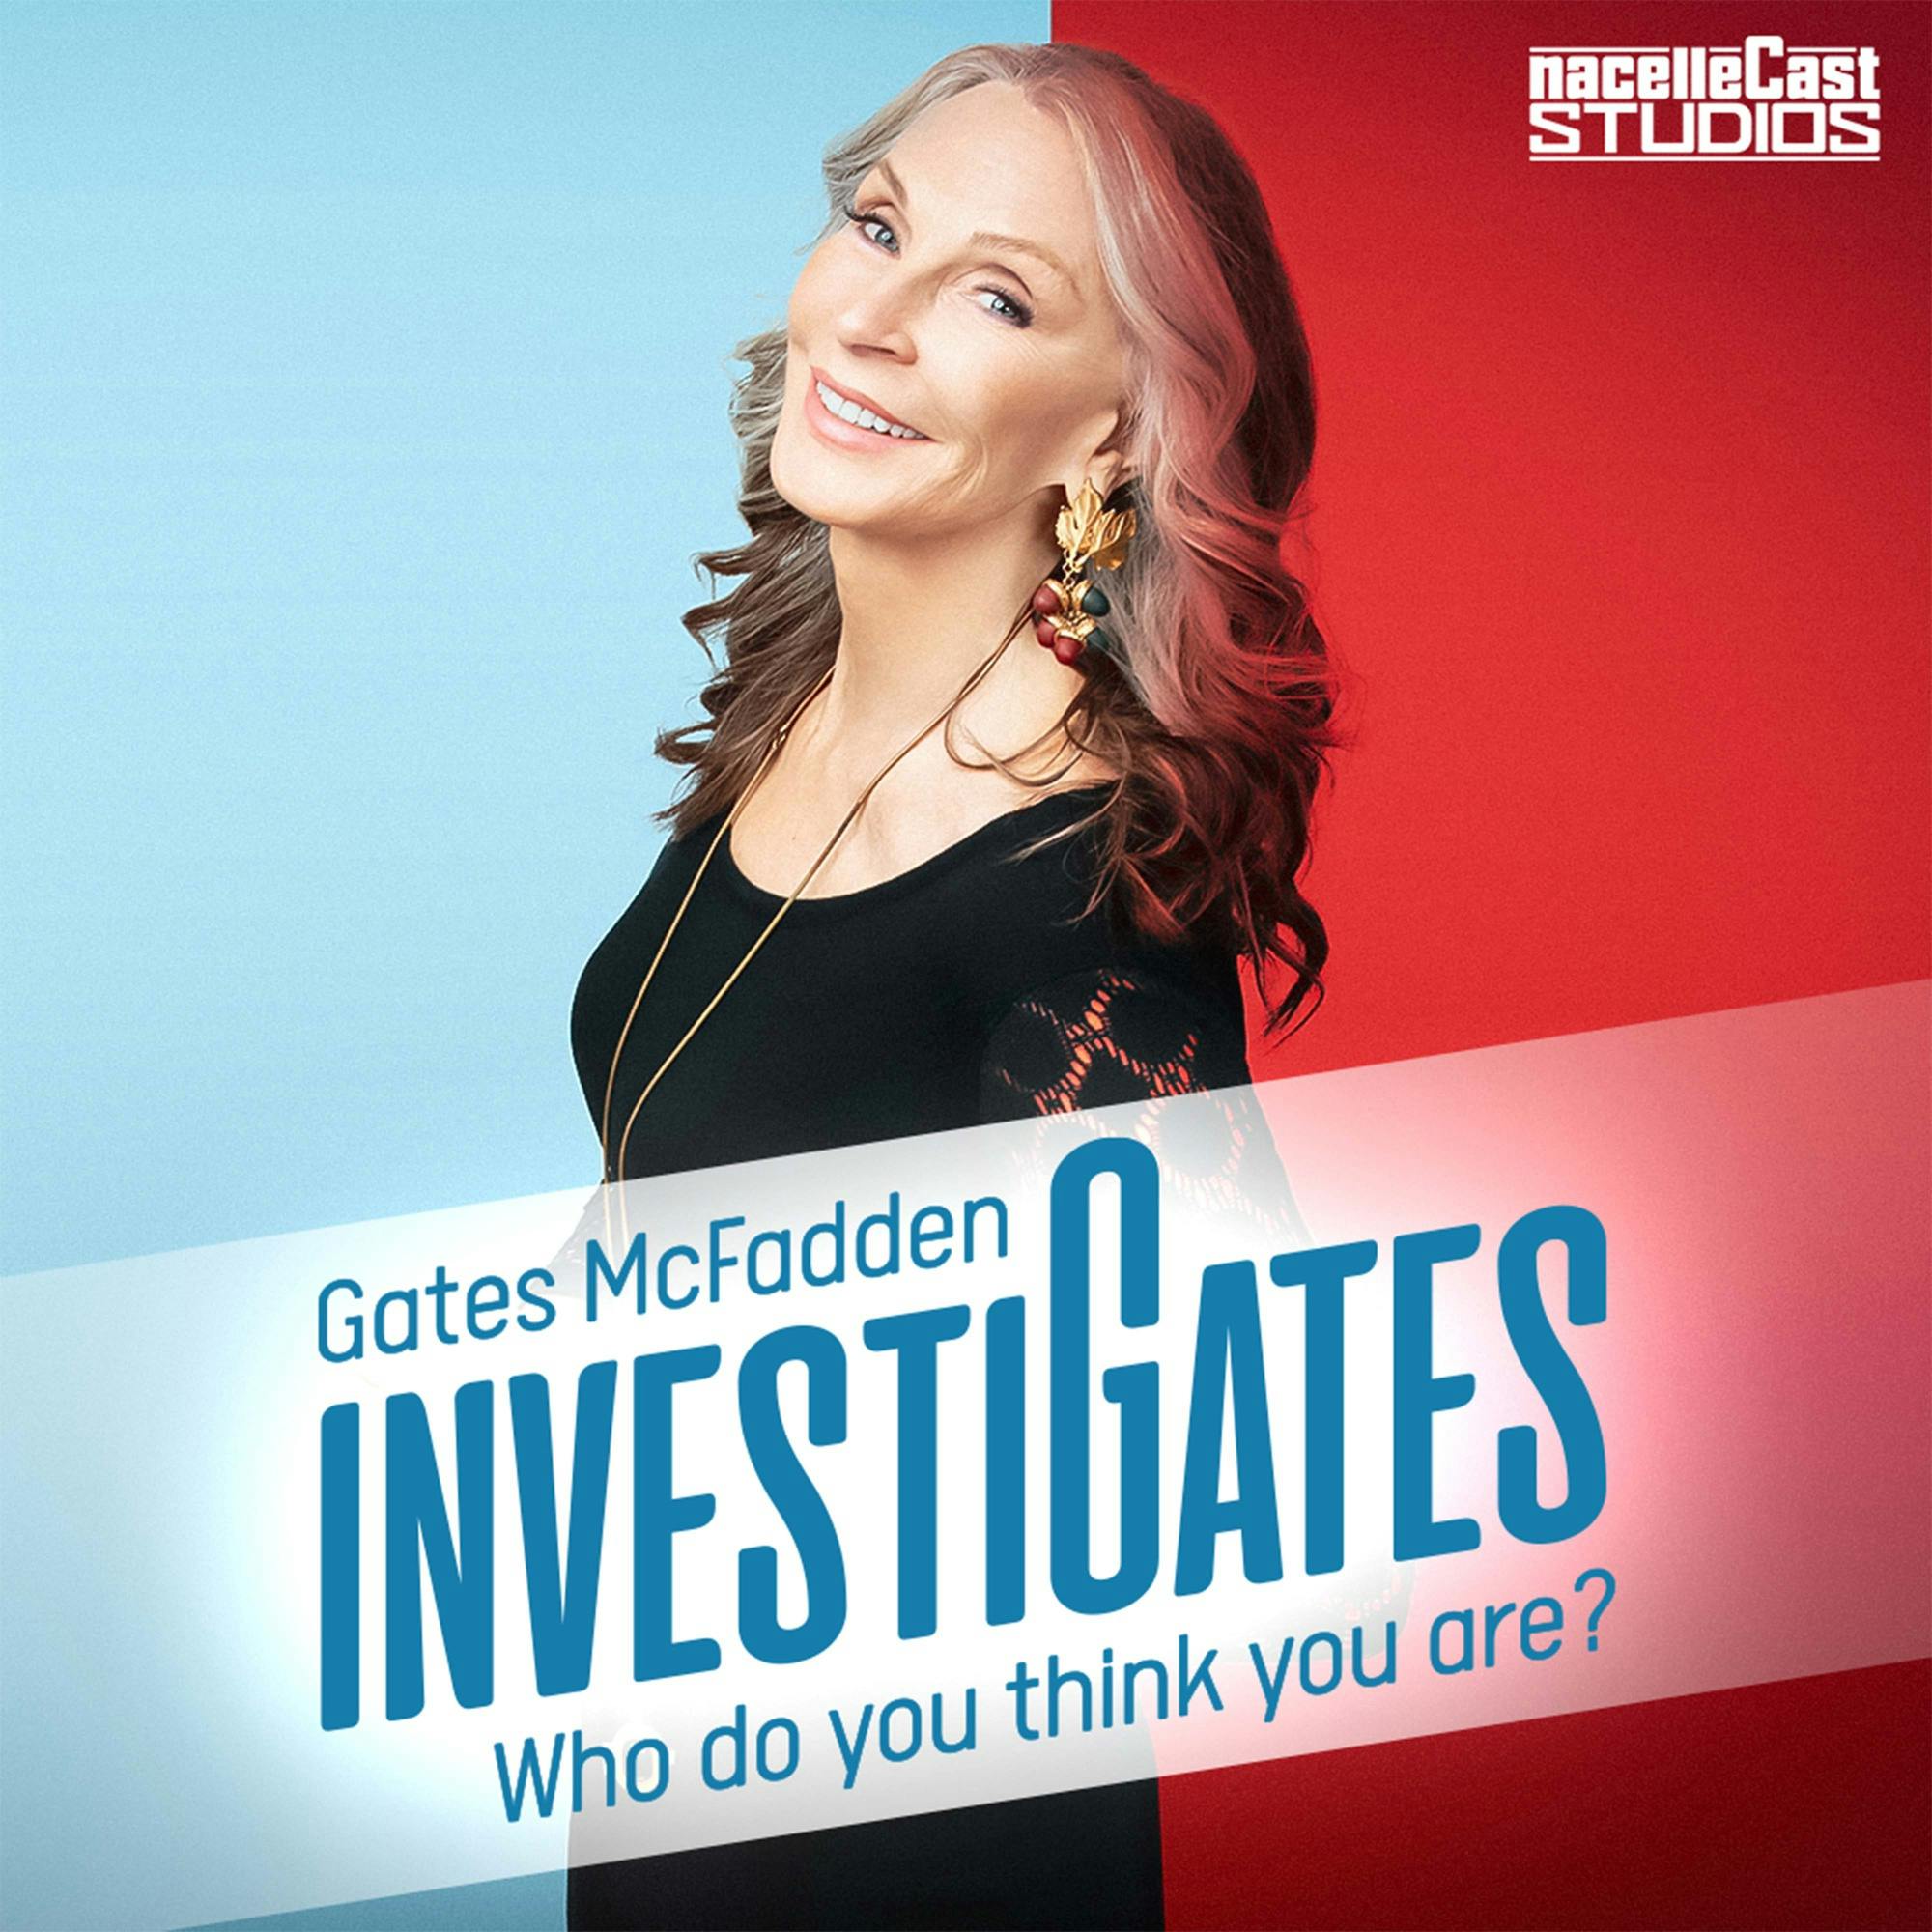 Gates McFadden Investigates: Who do you think you are? podcast show image